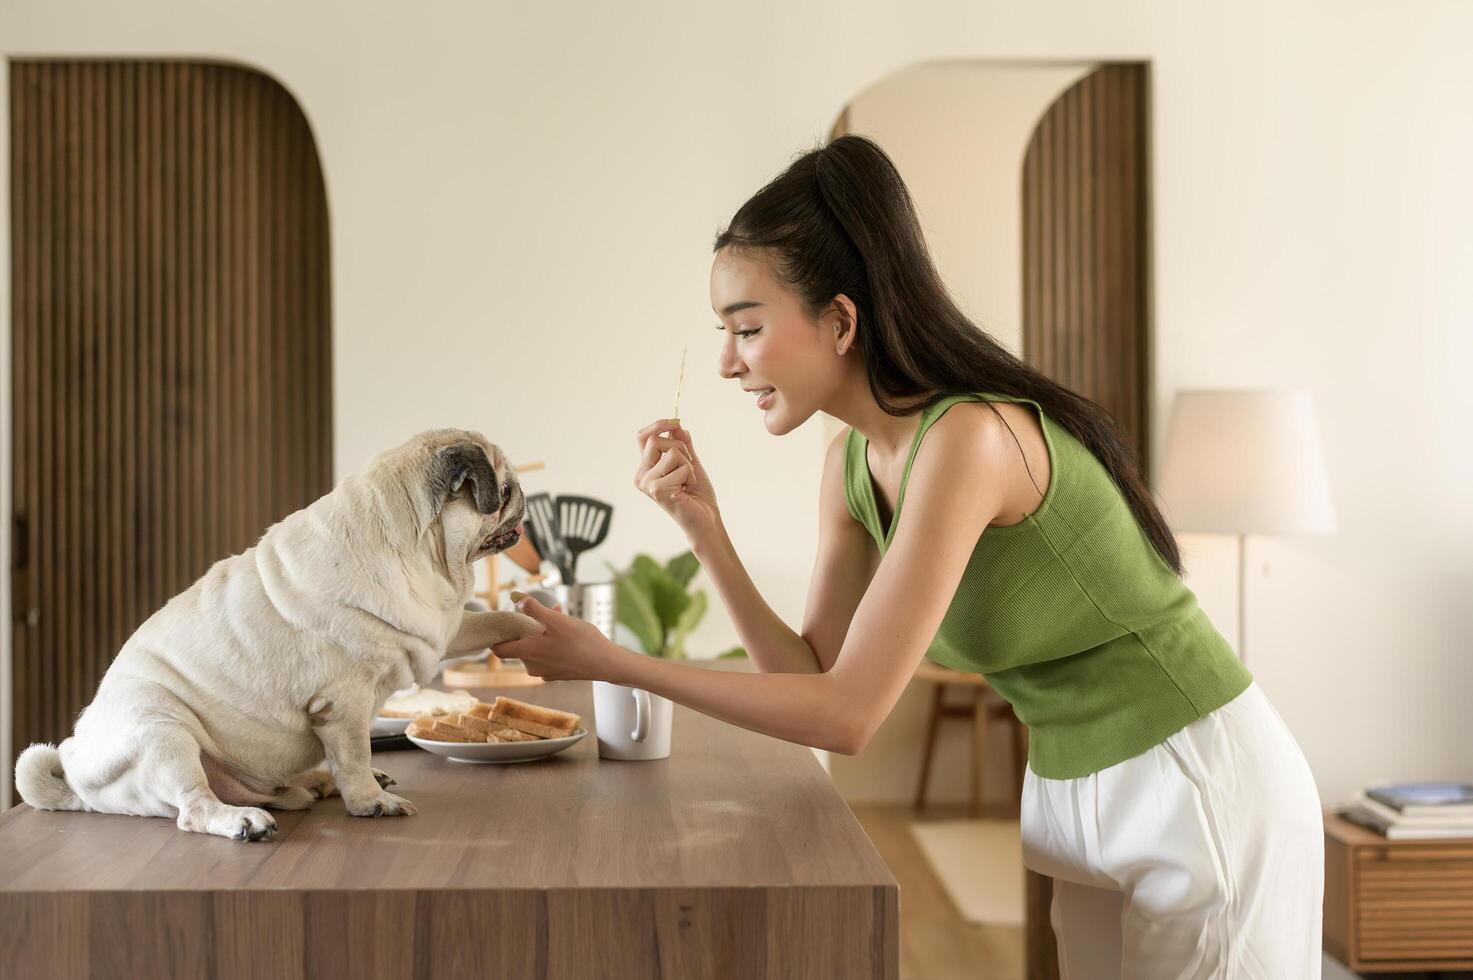 Asian woman preparing coffee and toast bread for breakfast enjoy with dog at the kitchen table in the morning photo